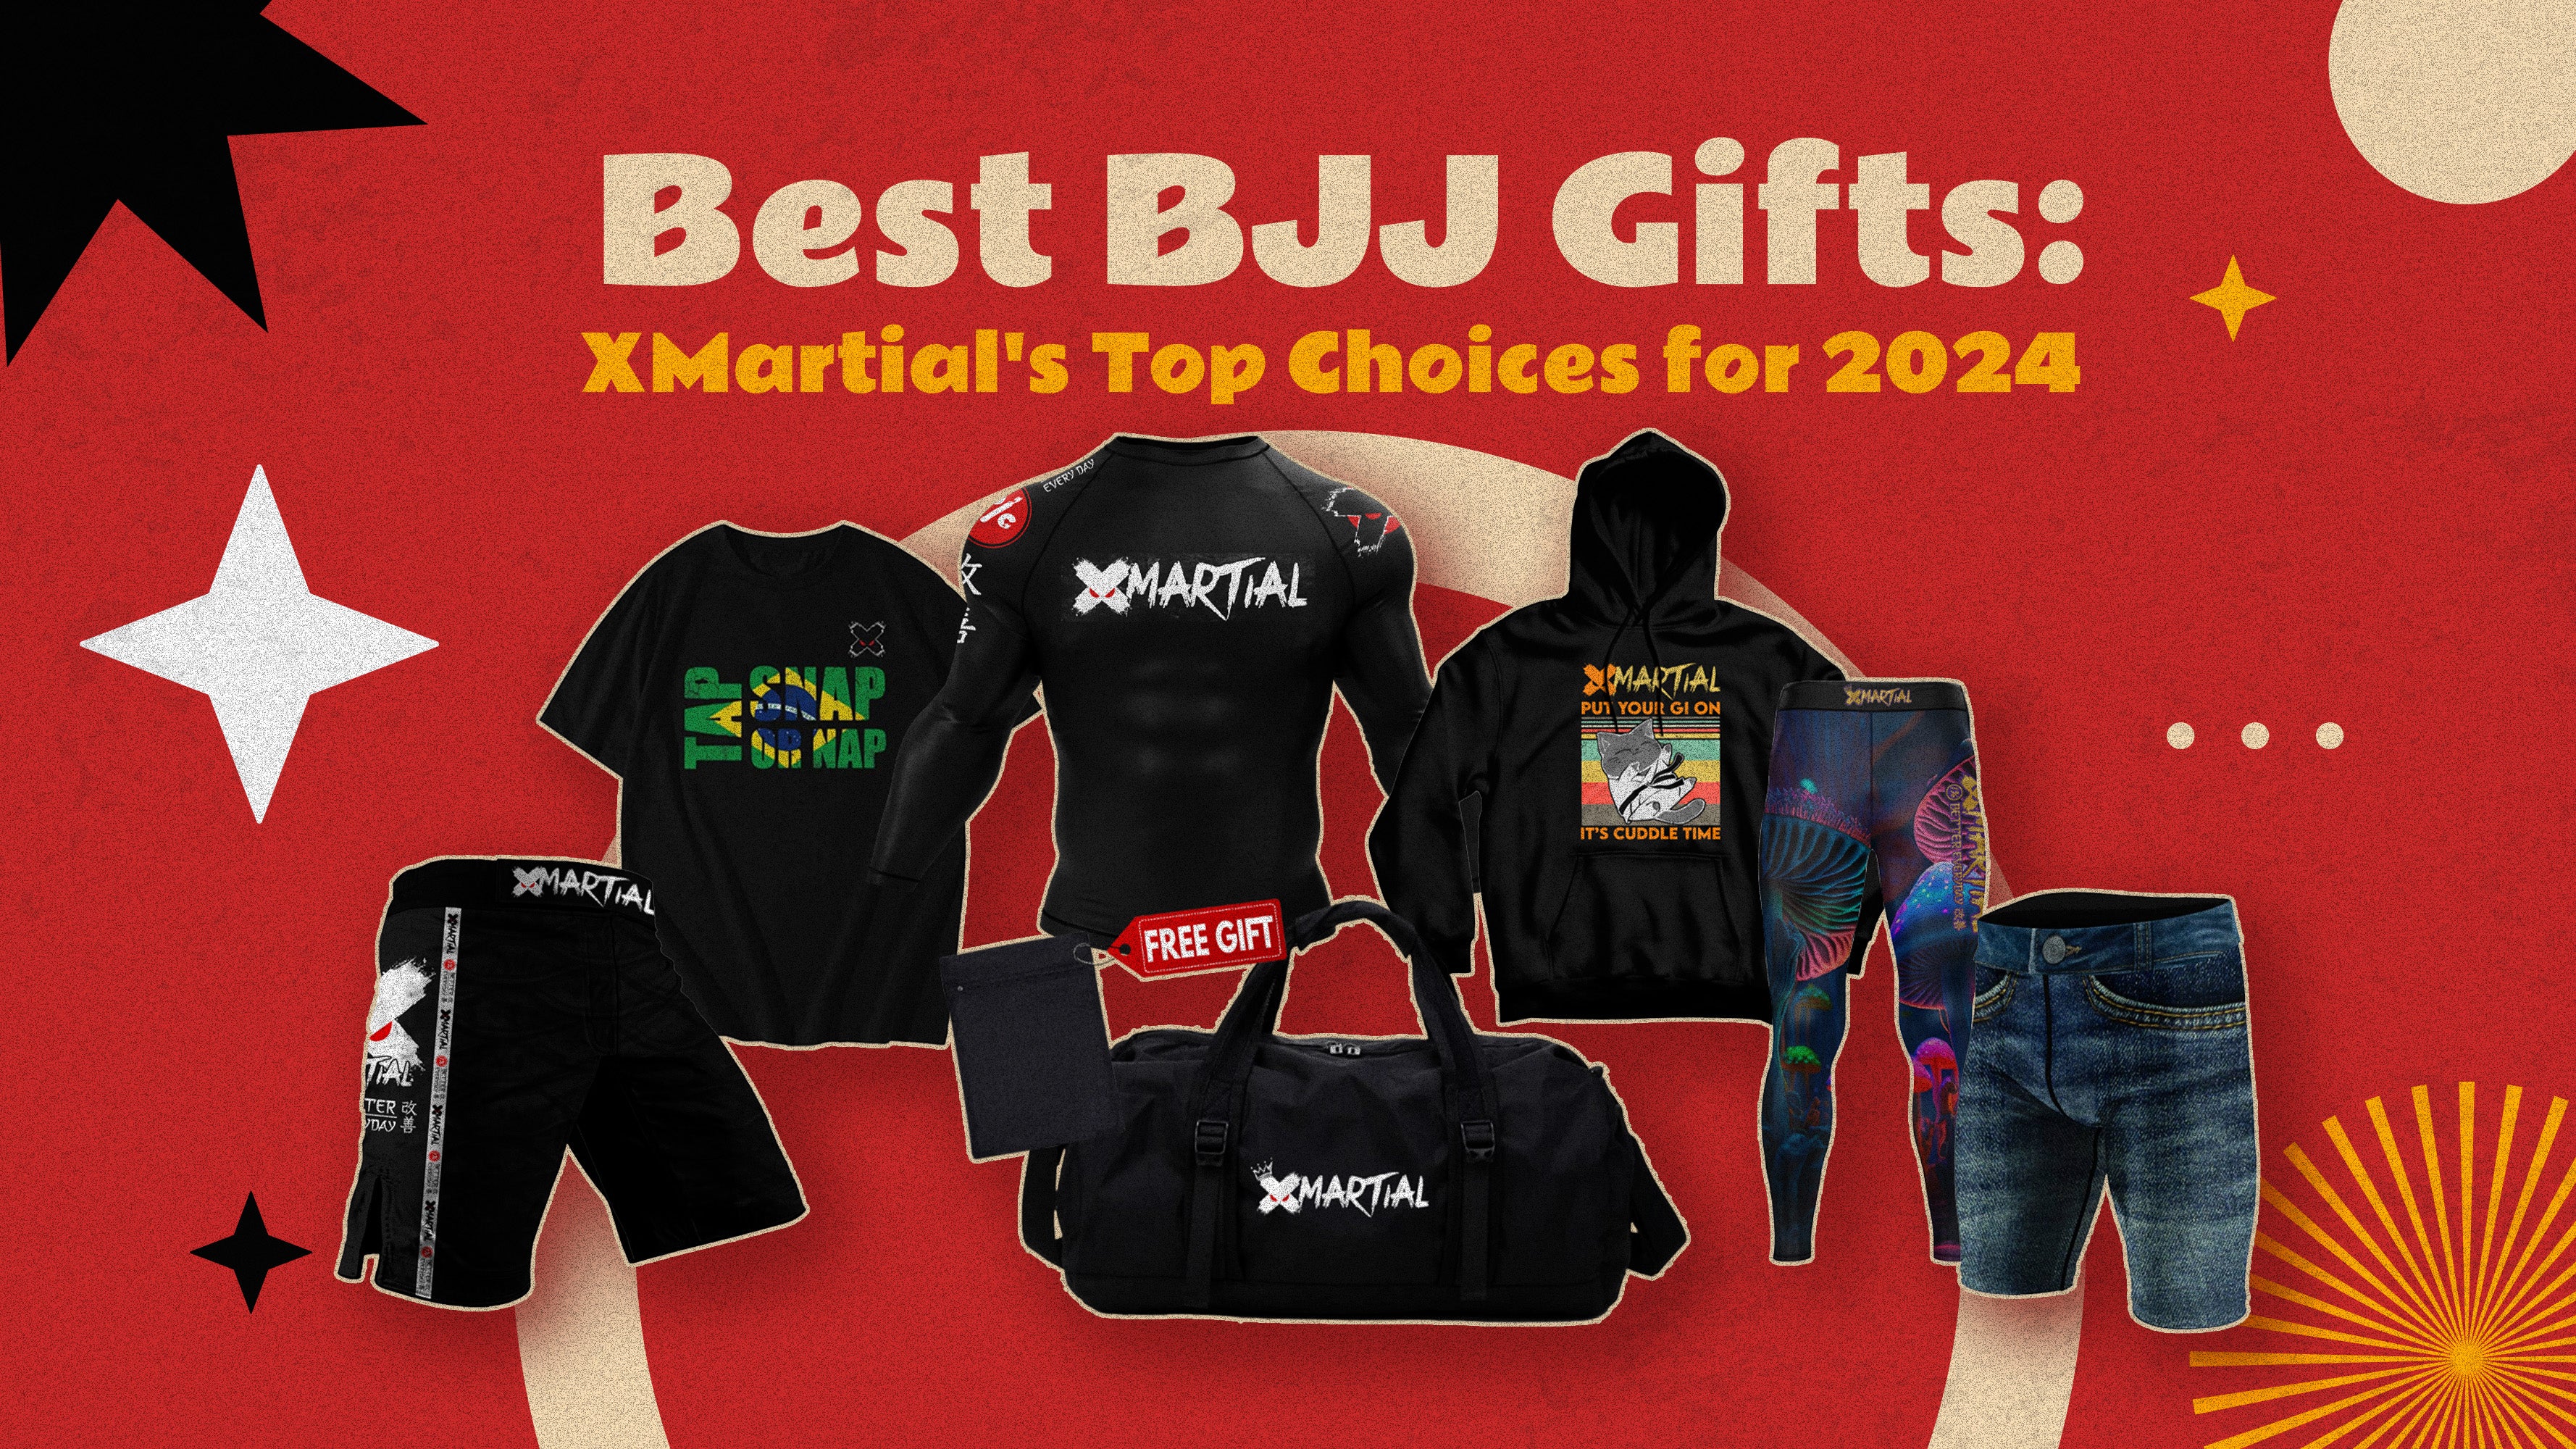 Best BJJ Gifts: XMartial's Top Choices for 2024